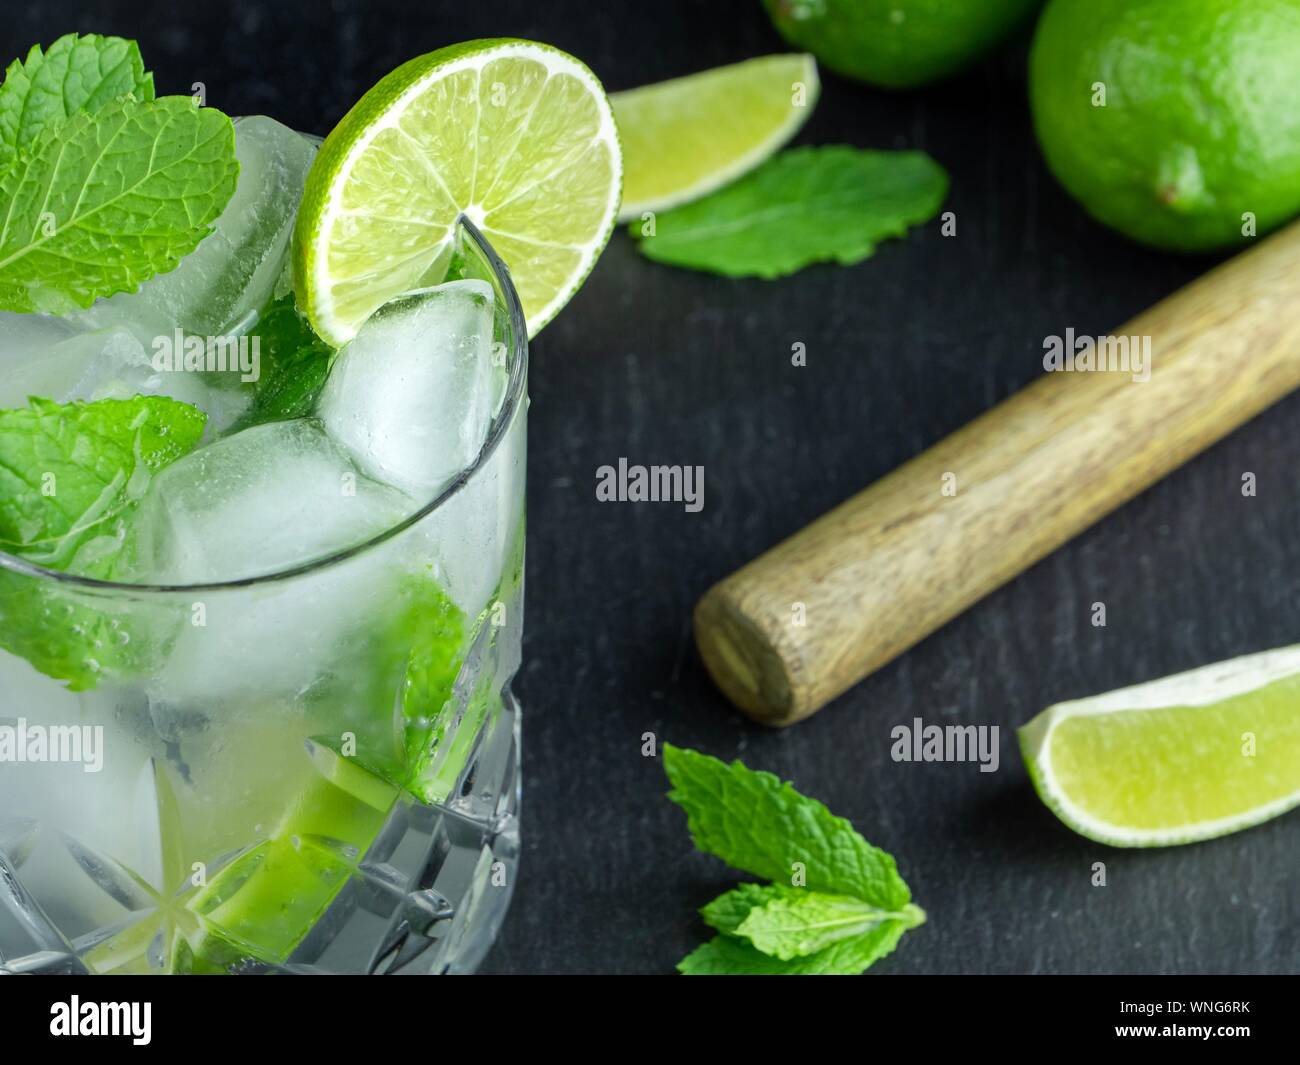 A mojito cocktail made from fresh mint and lime in a cut glass tumbler against a black slate background Stock Photo